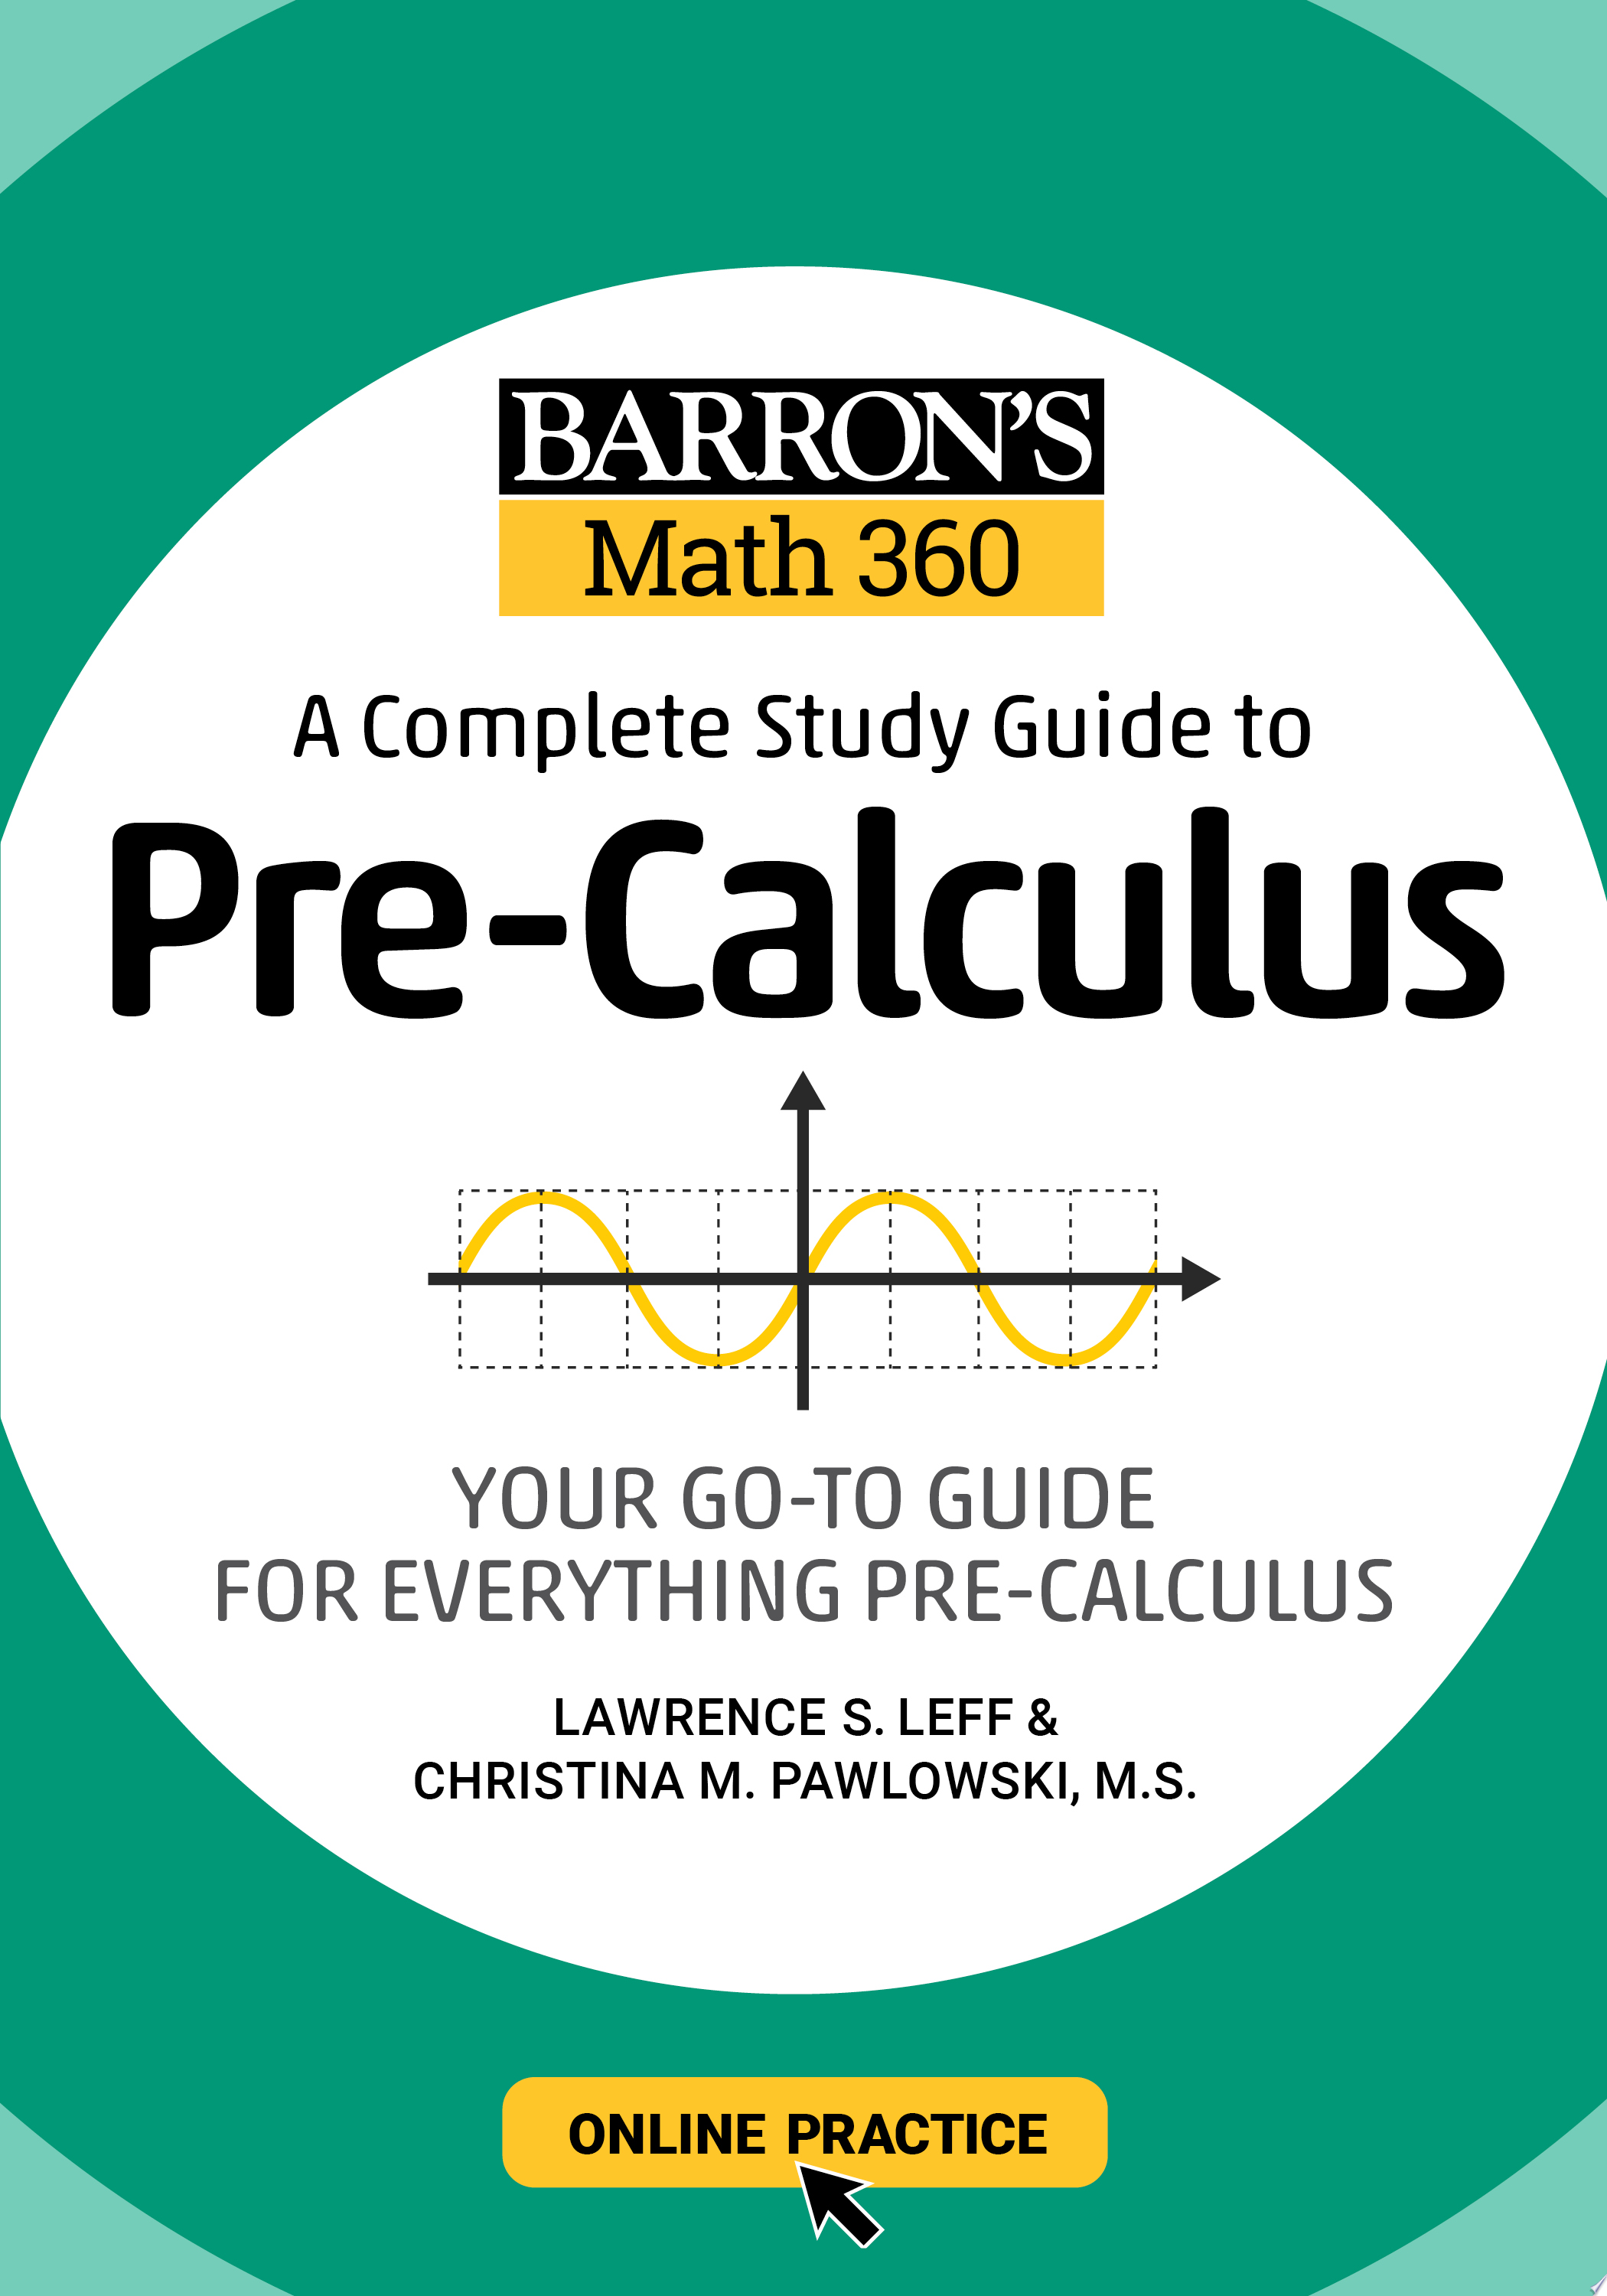 Image for "Barron's Math 360: A Complete Study Guide to Pre-Calculus with Online Practice"